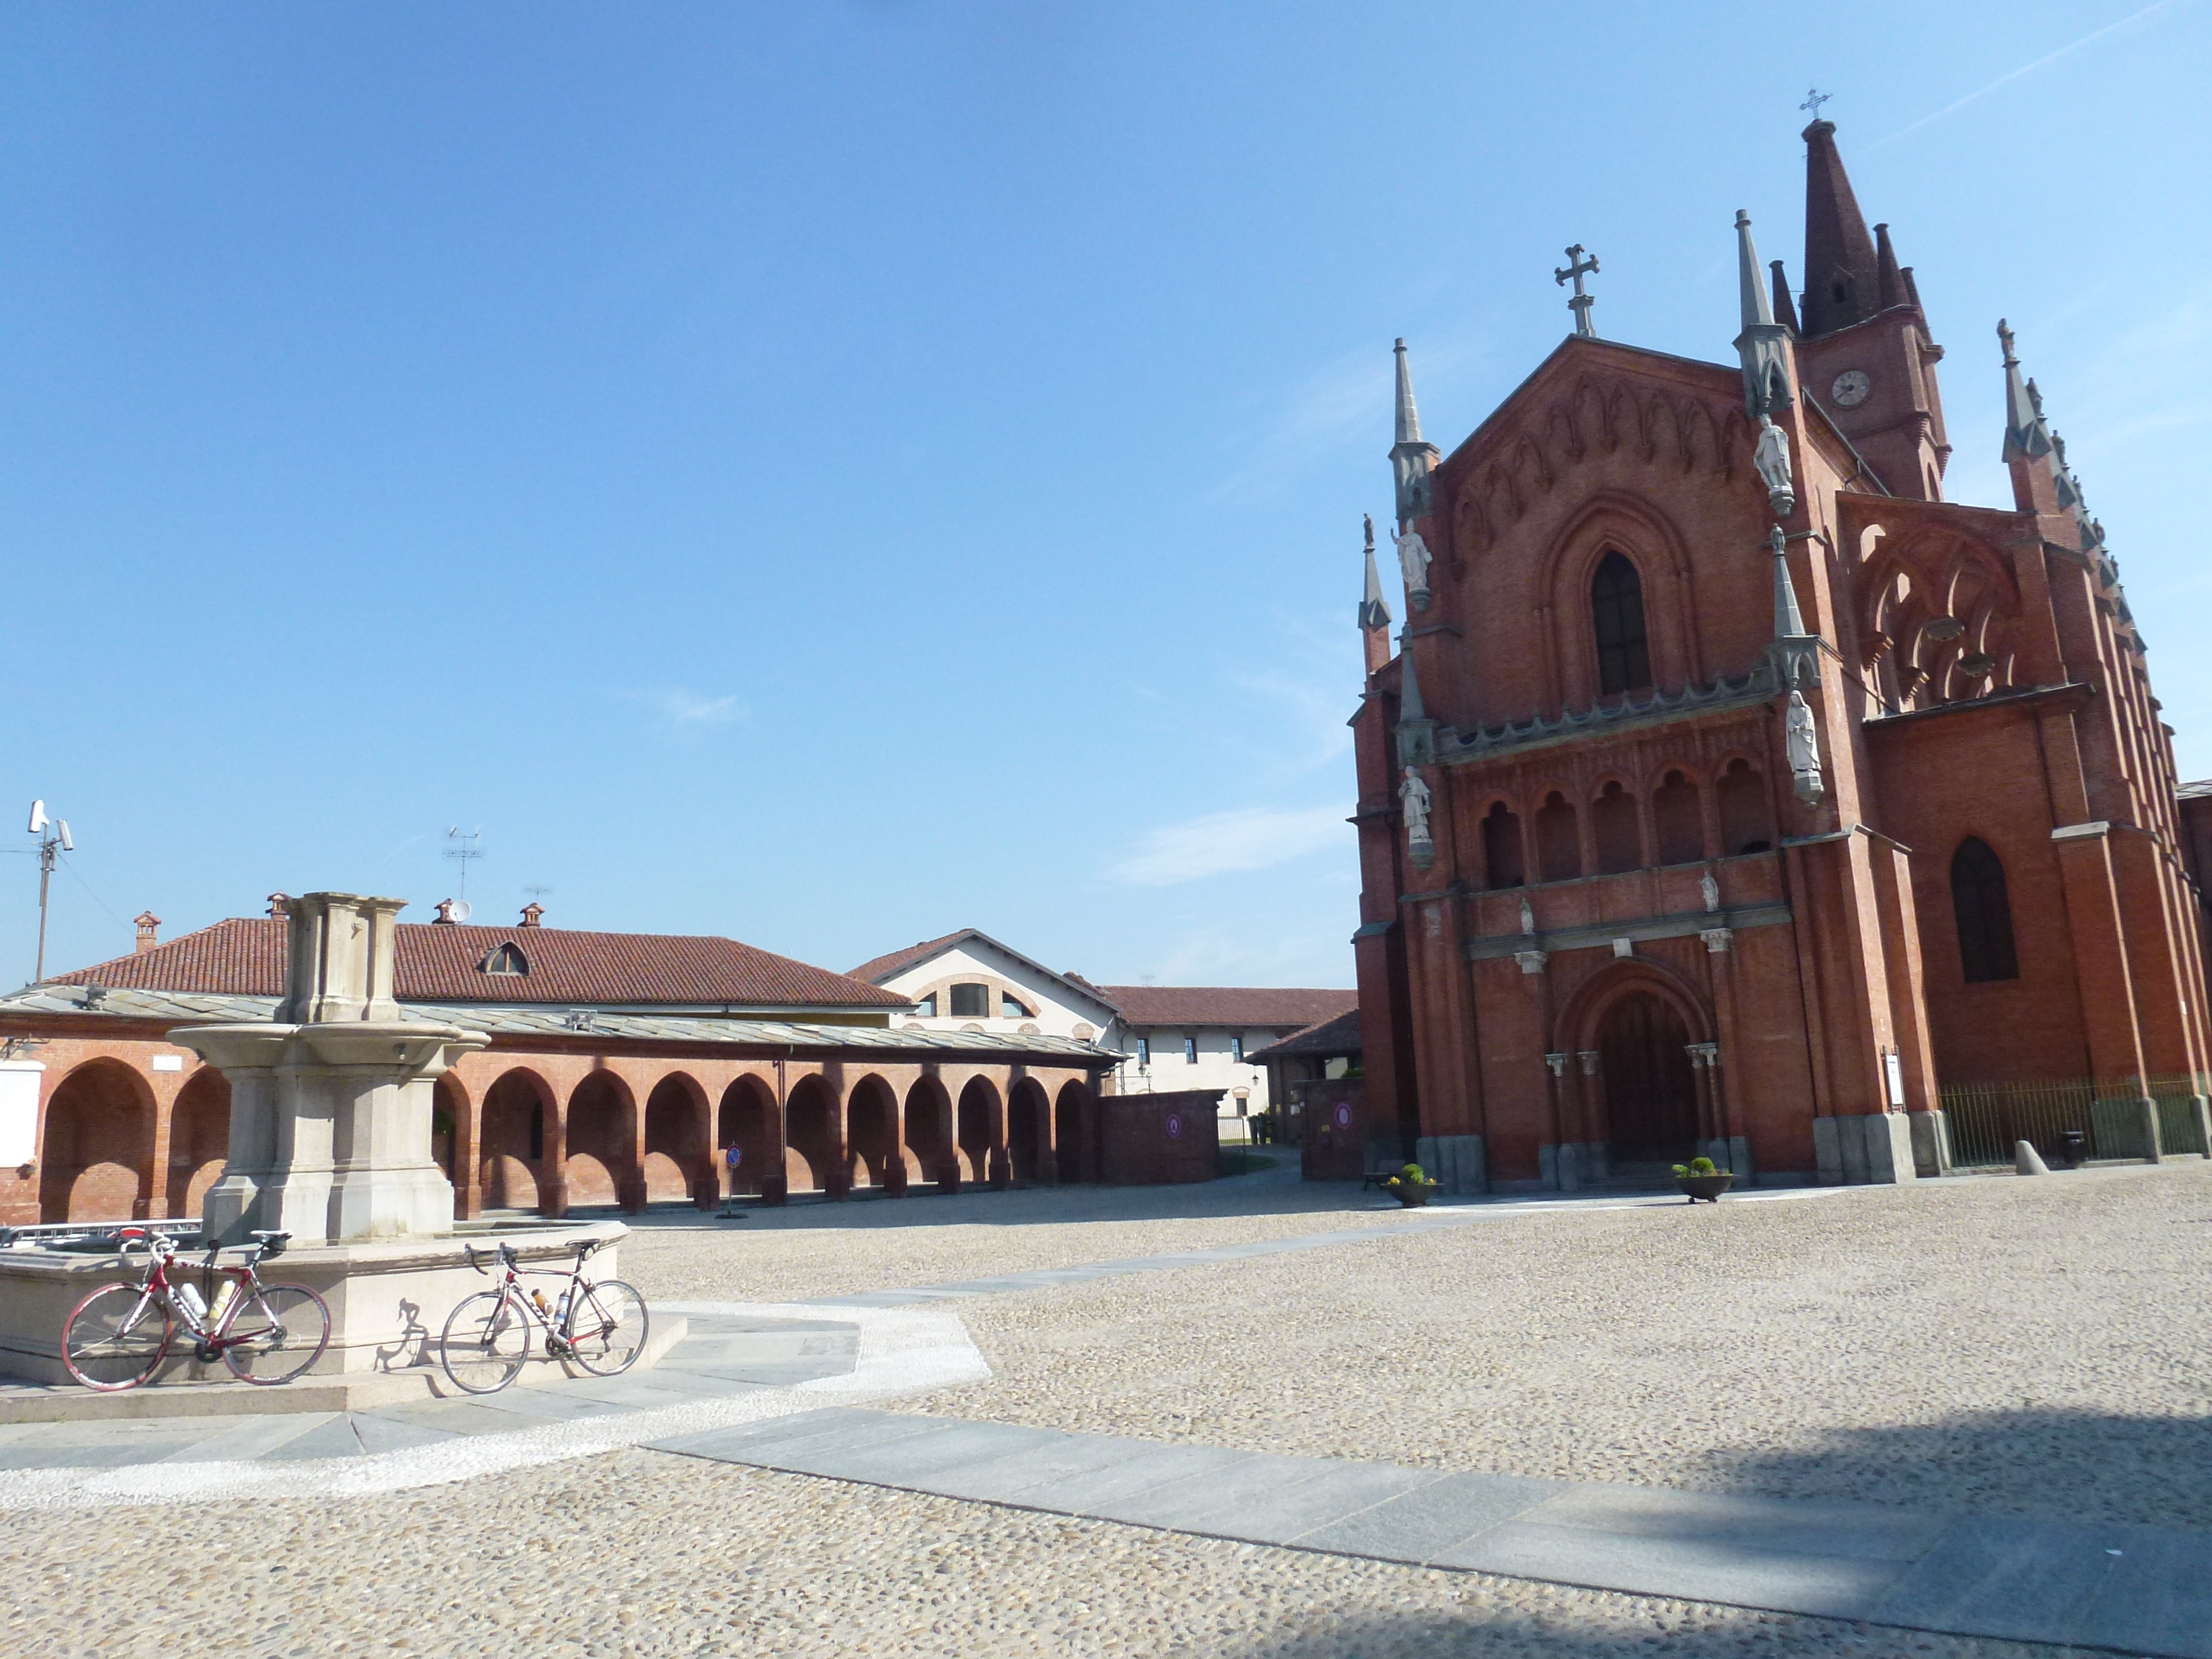 Cycle past the brick red gothic church in Pollenzo, Piedmont